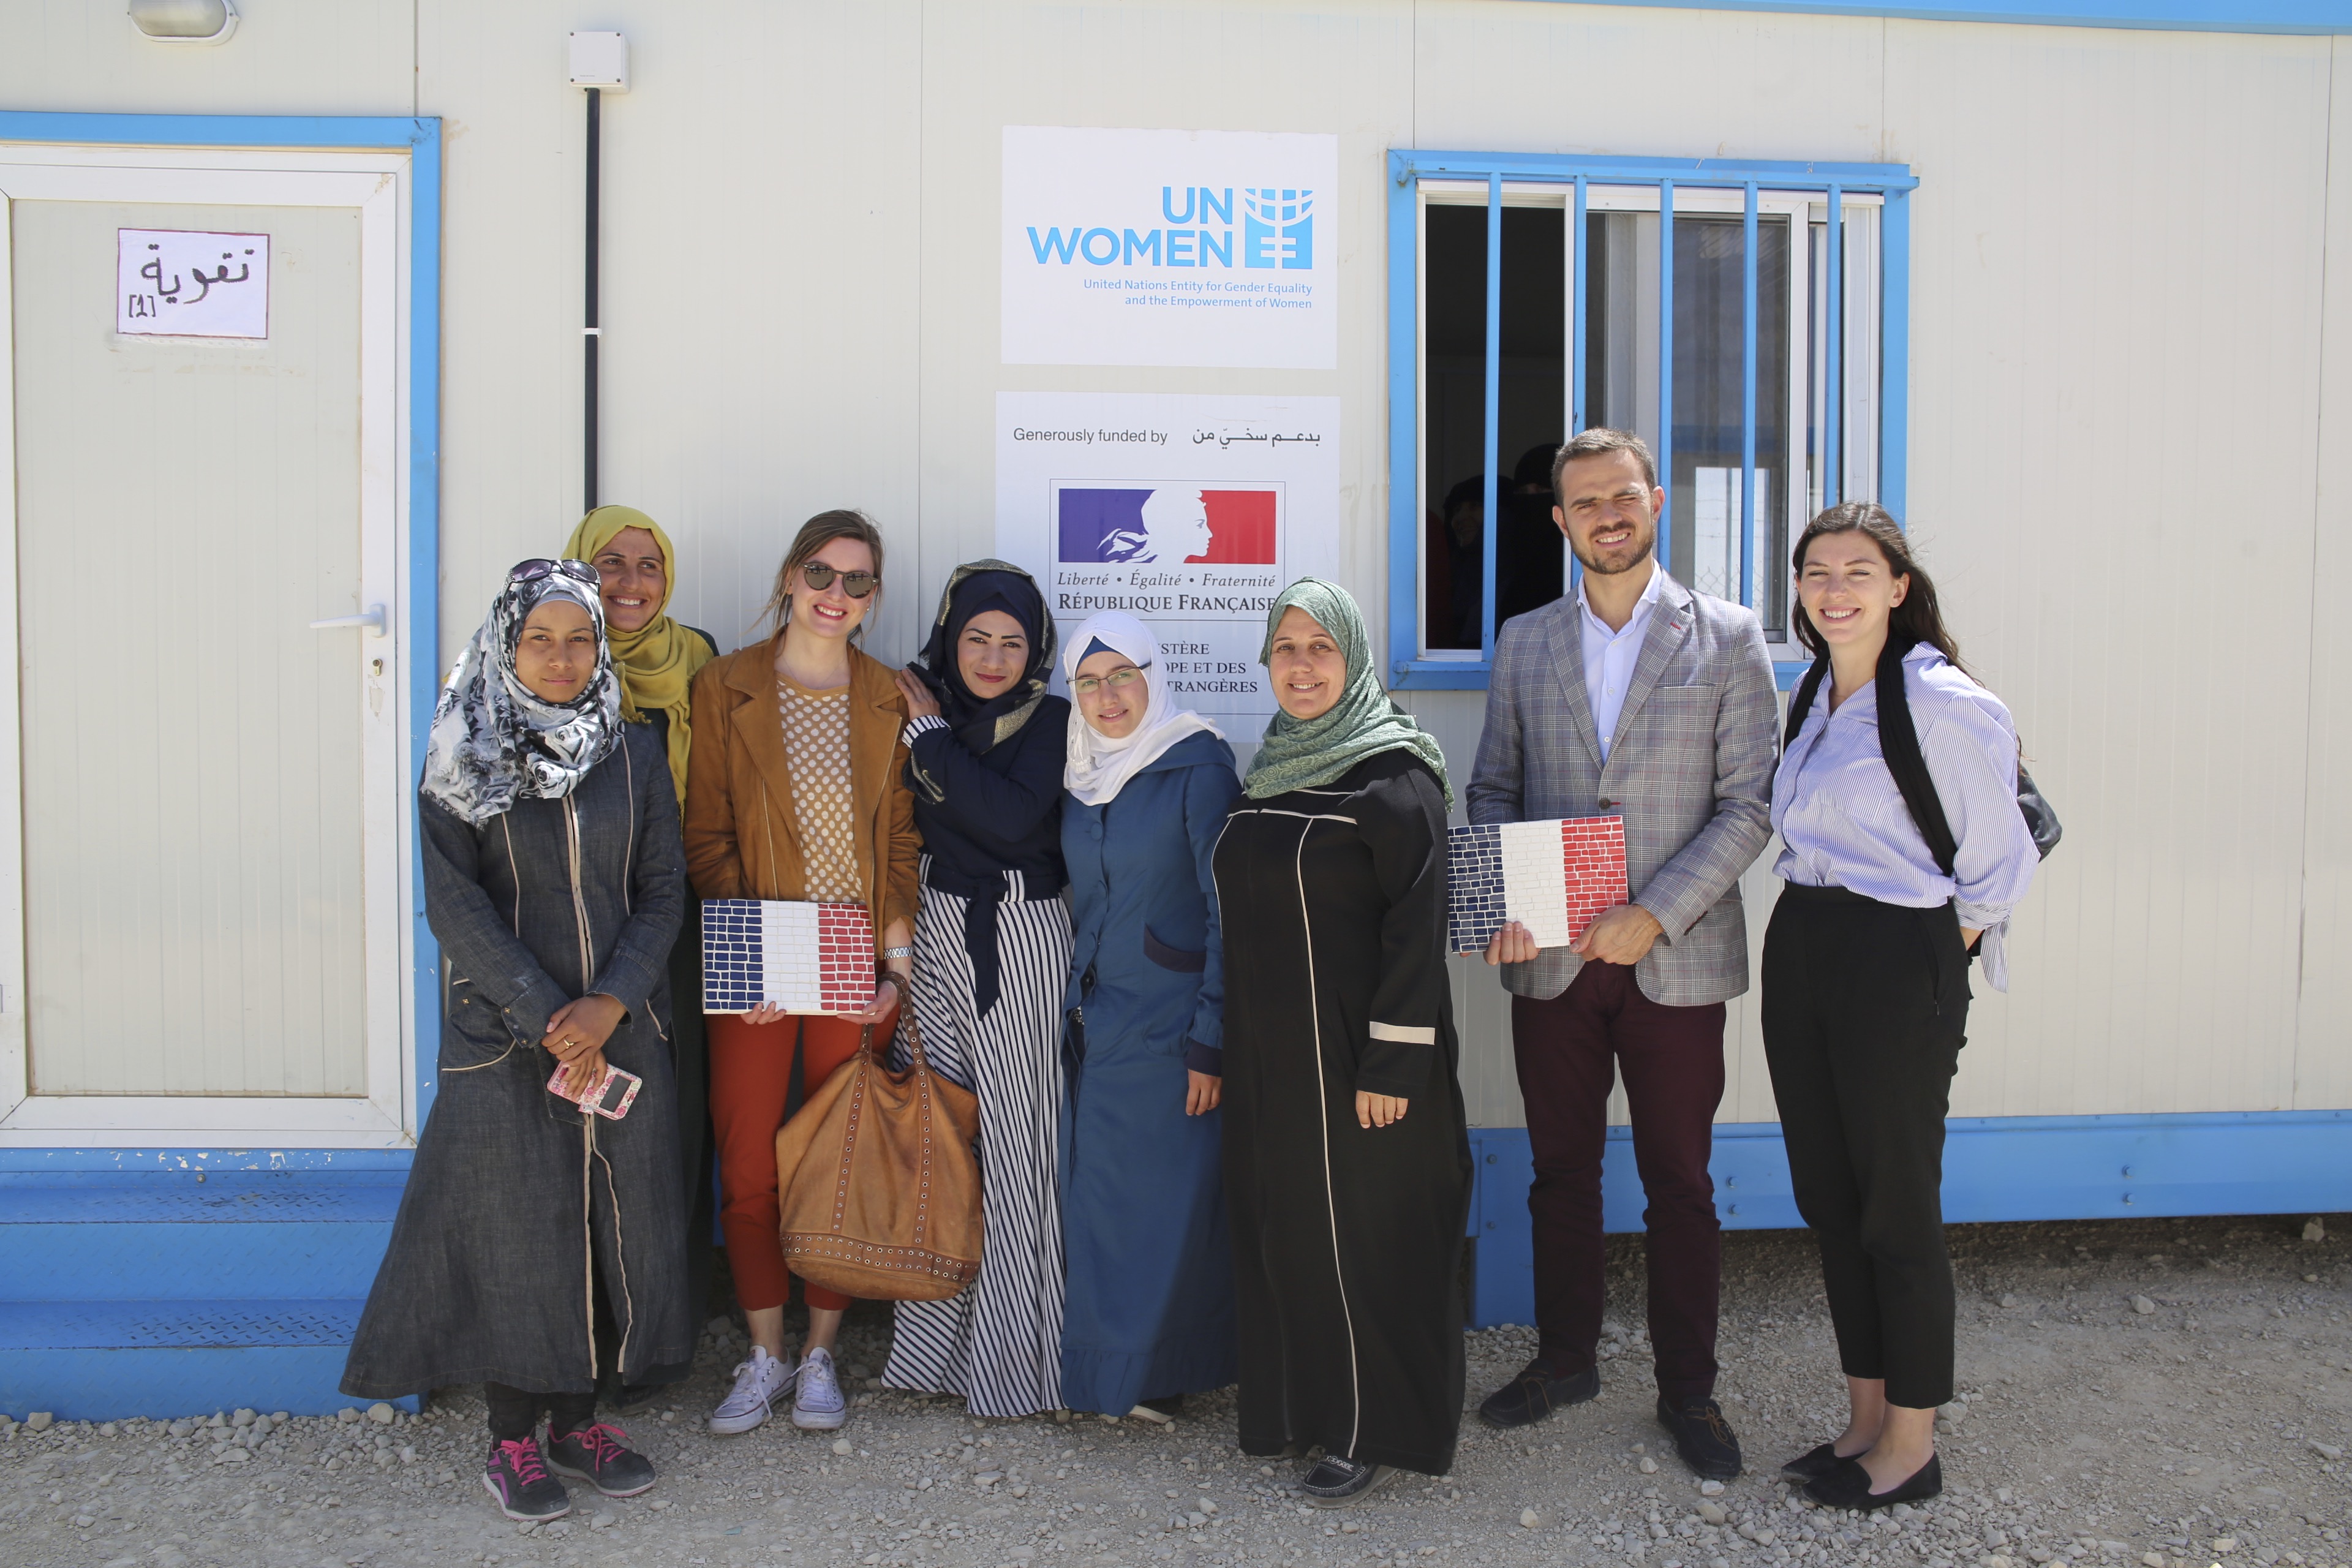 Women of the Oasis handed over a mosaic plaque of the French flag, a gift for the delegations visit and gratitude for the continued support from the French Government. 